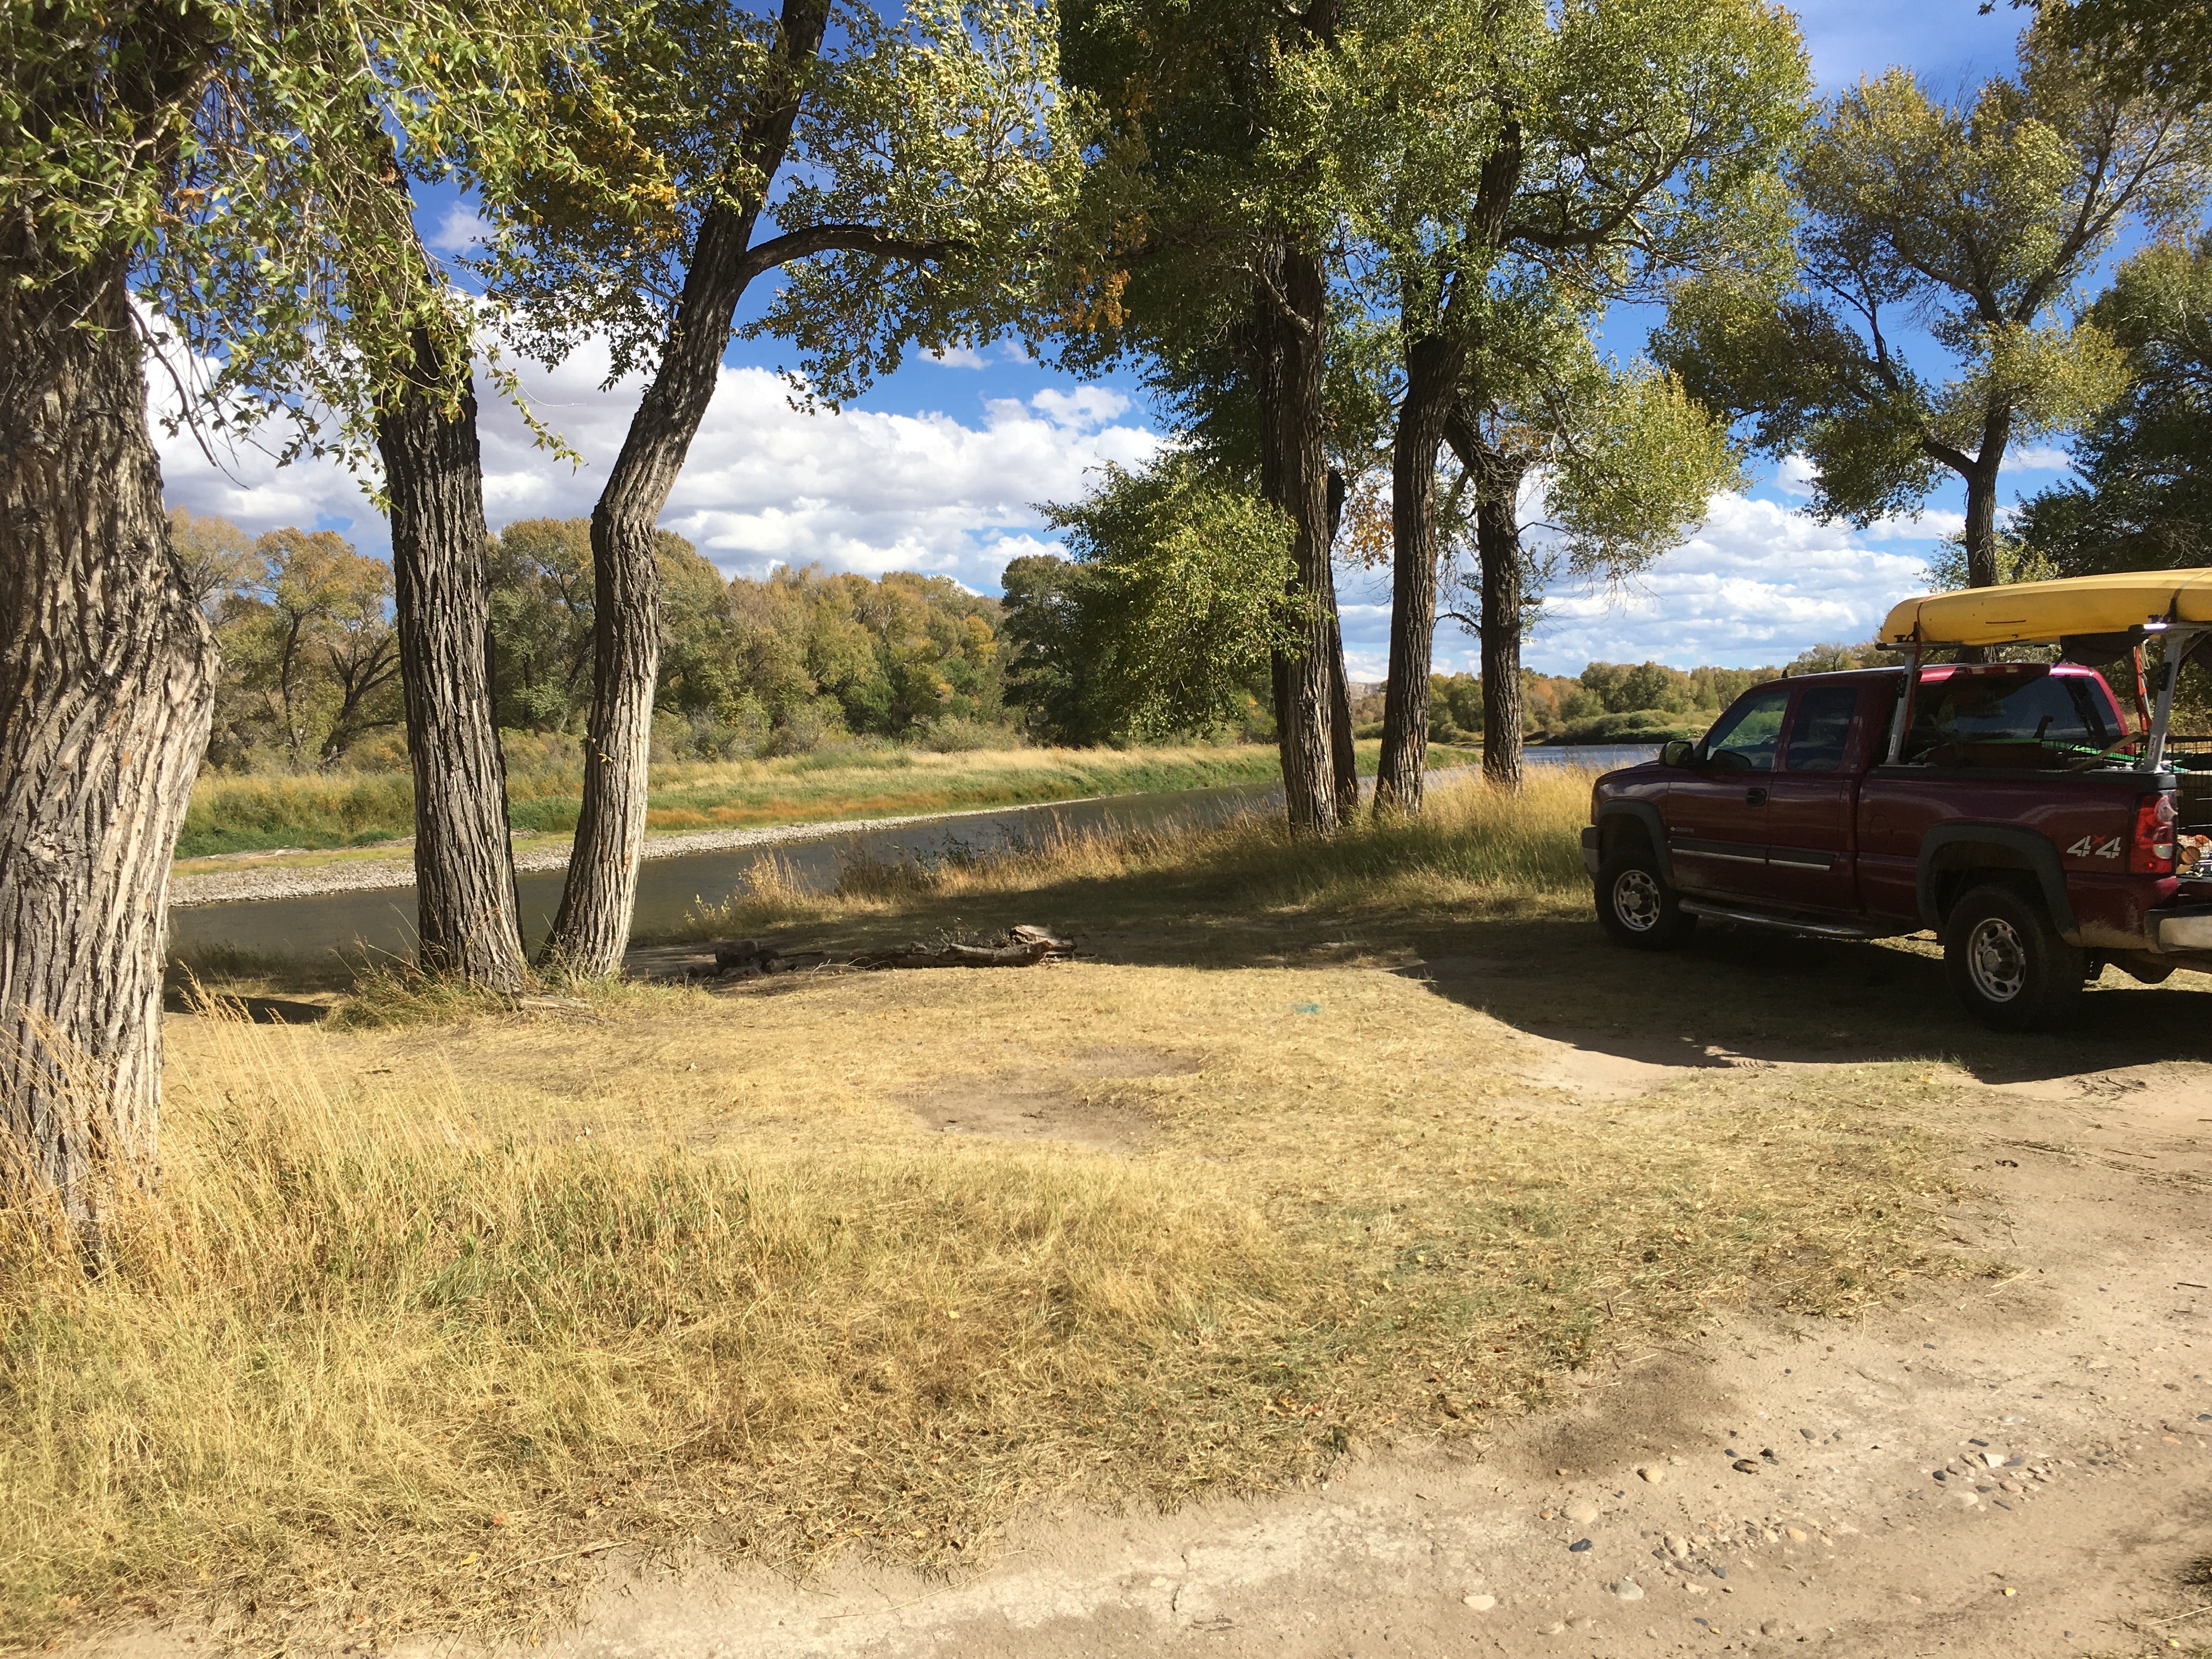 Camper submitted image from Sanger Access Area, Dispersed Camping - 3